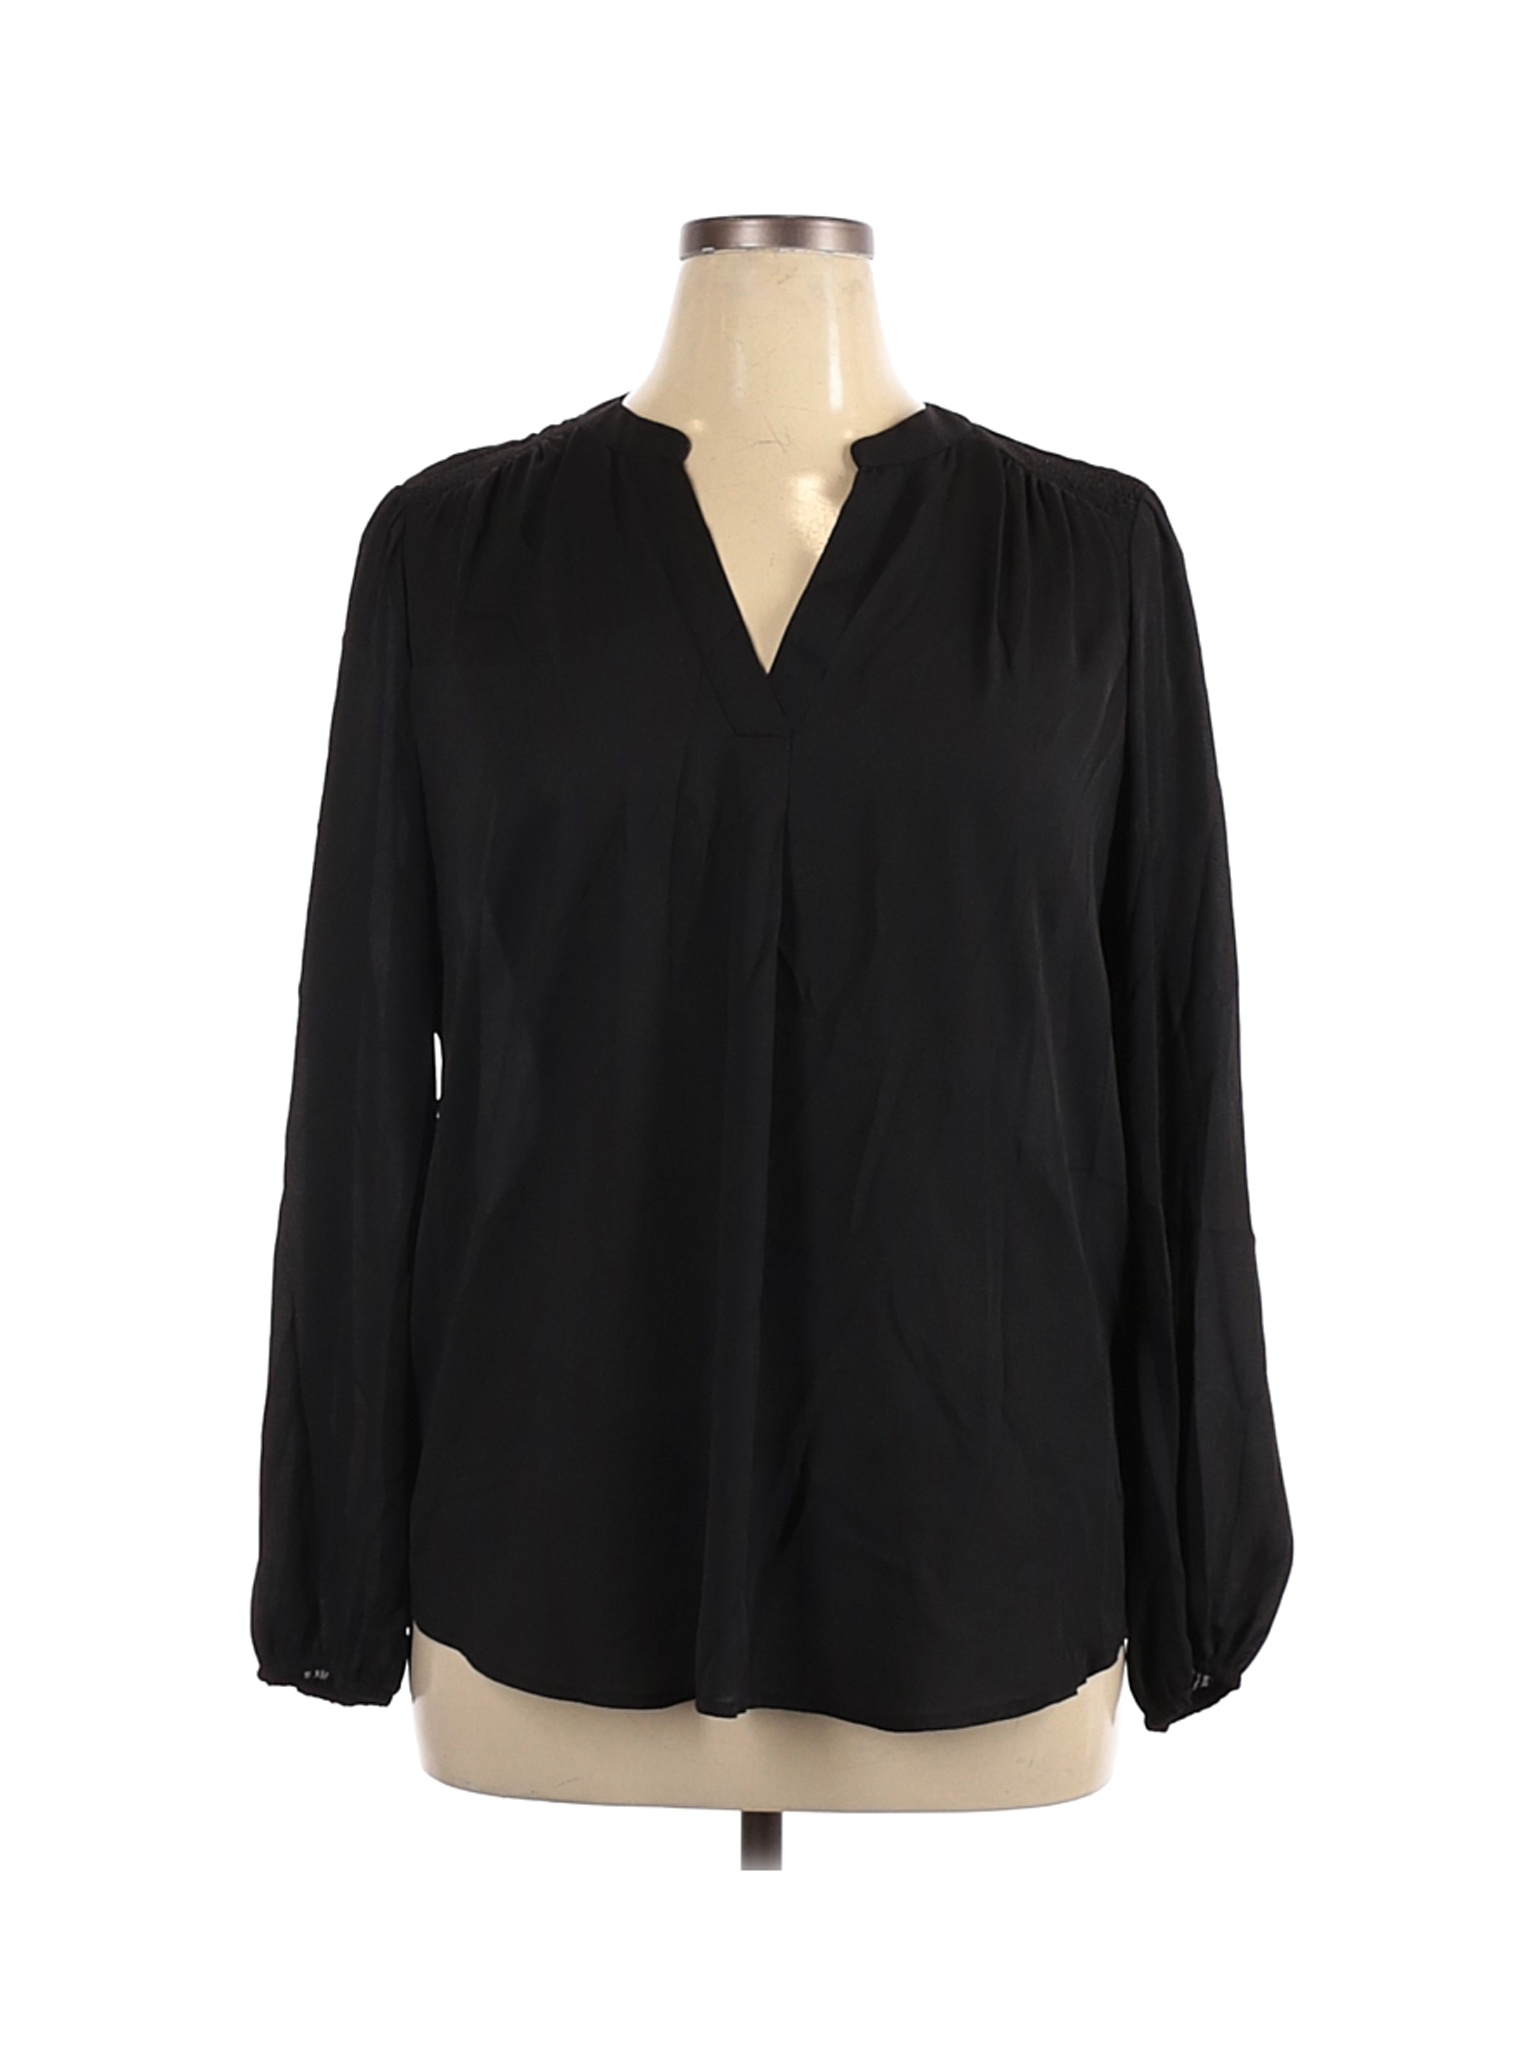 Gibson 100% Polyester Solid Black Long Sleeve Blouse Size XL - 73% off ...